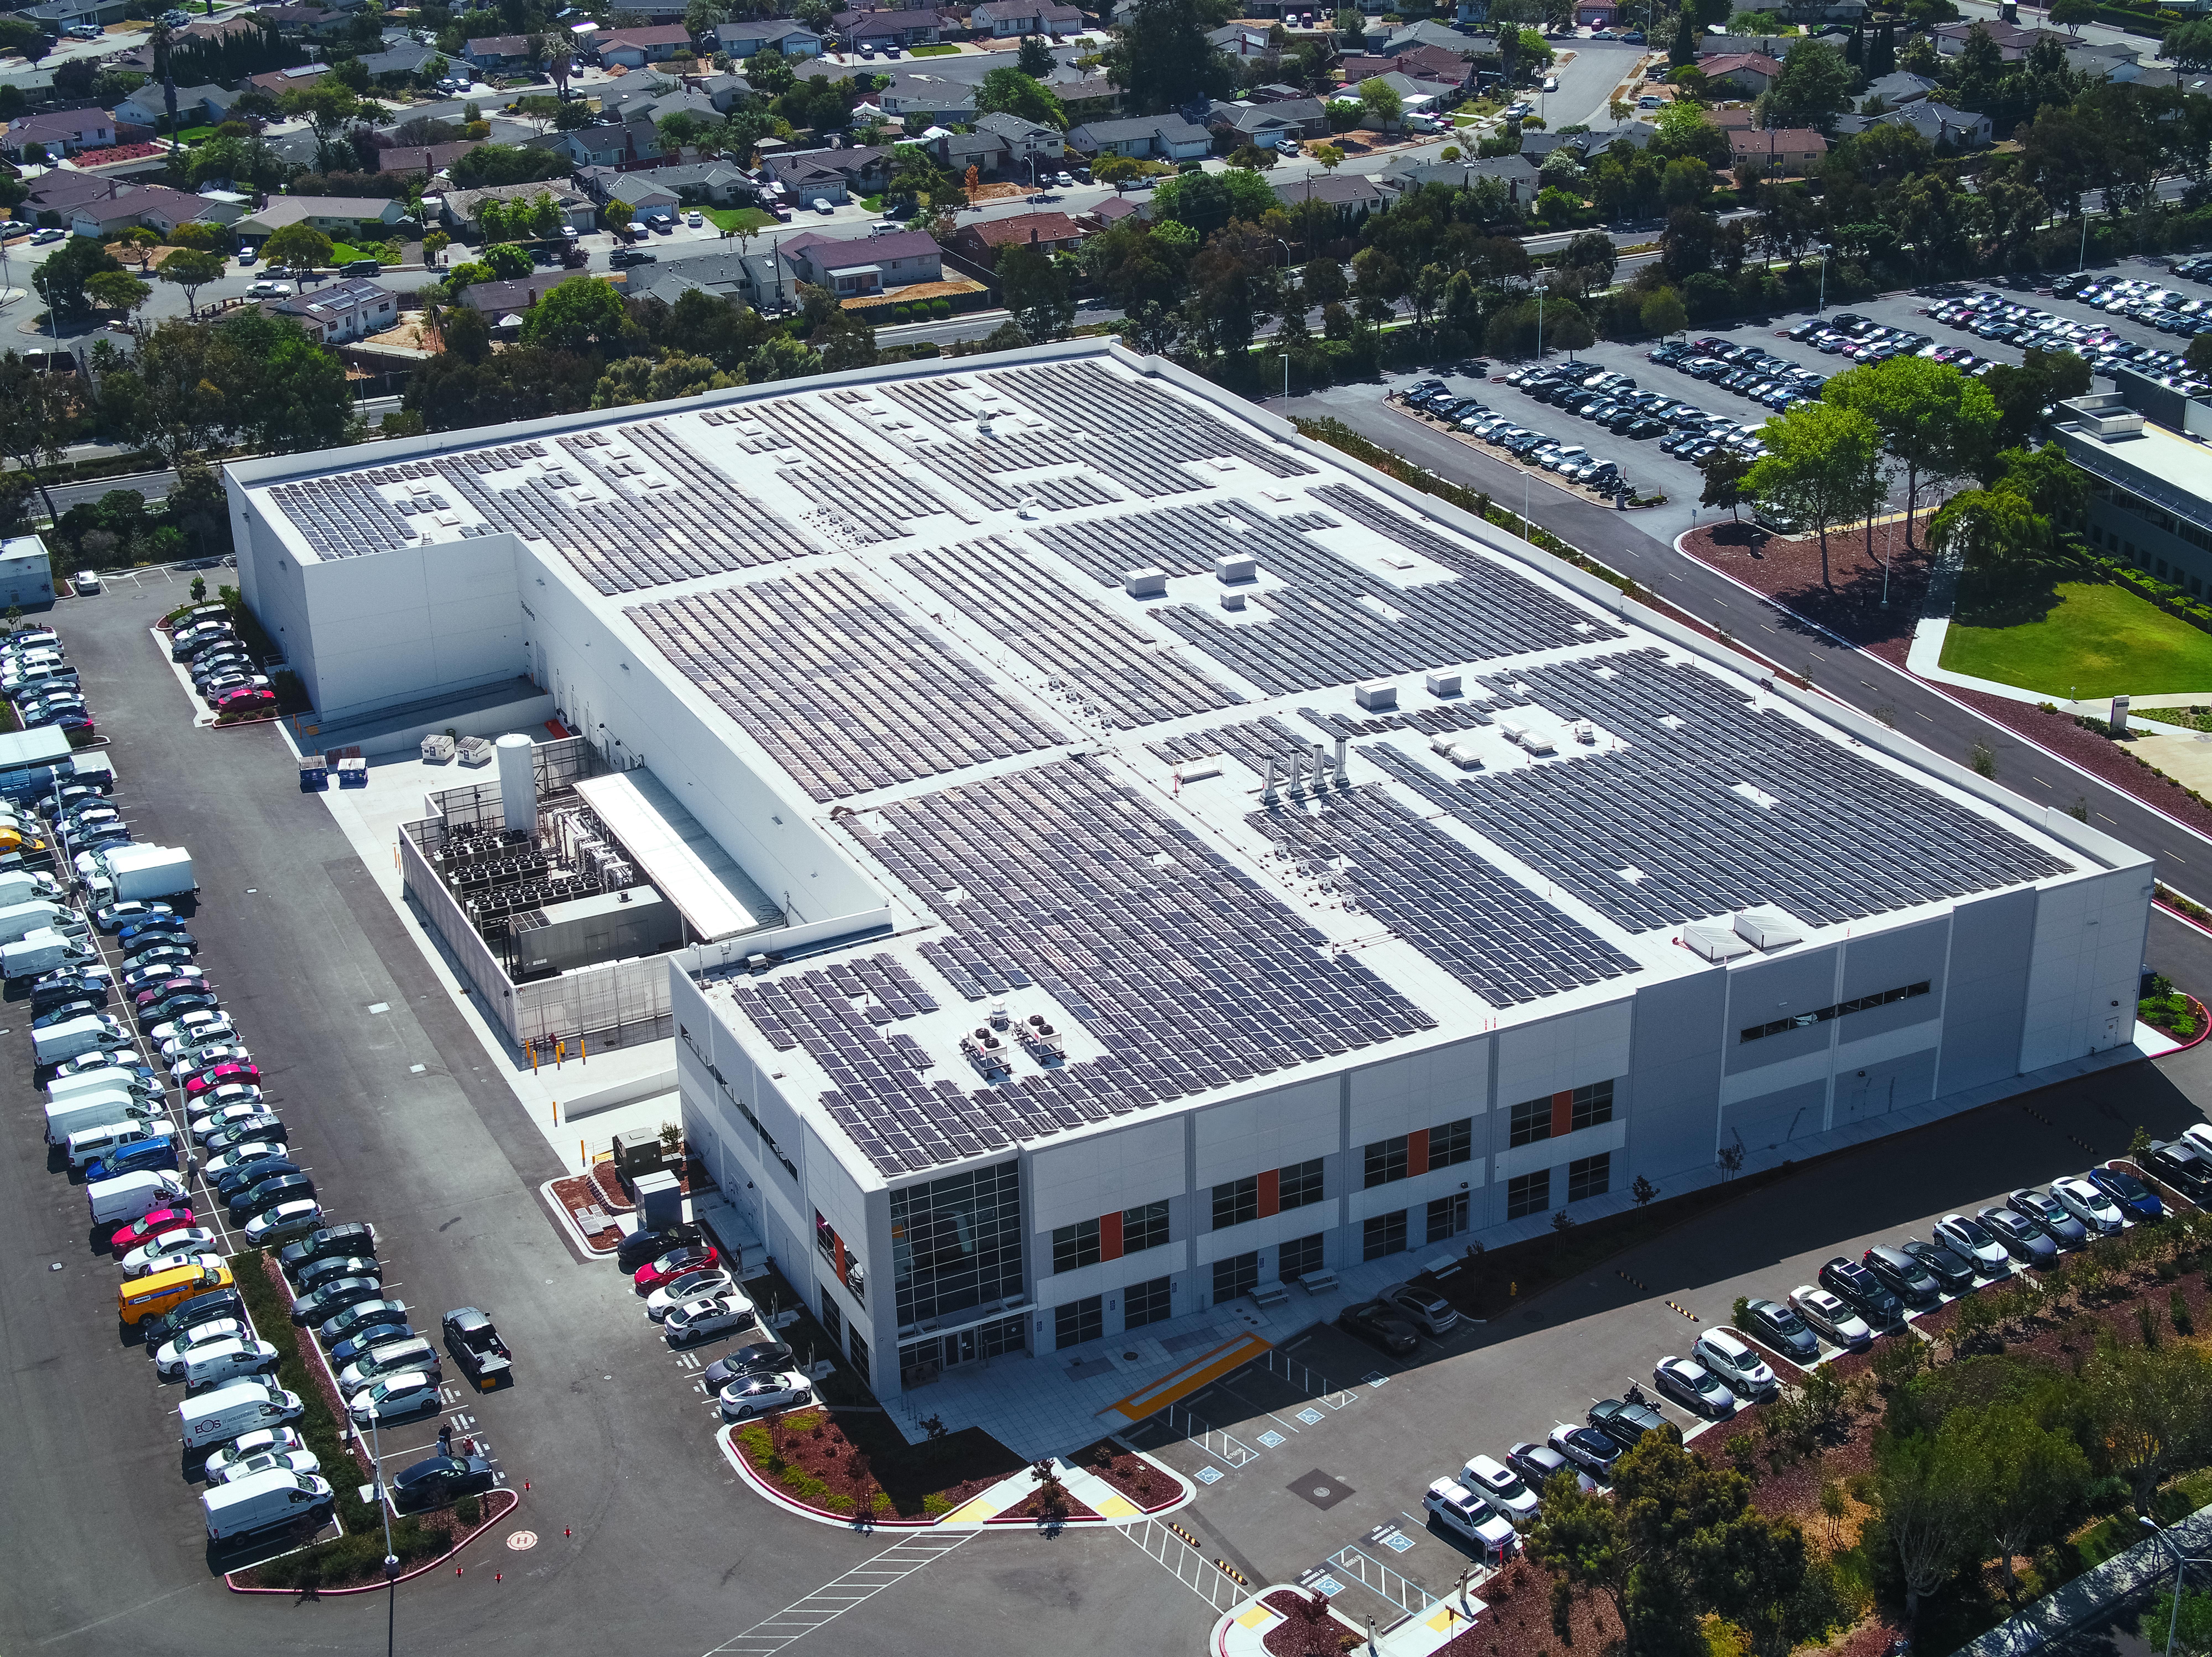 Drone view of commercial facility with solar panels installed on roof in California - Onyx Renewables